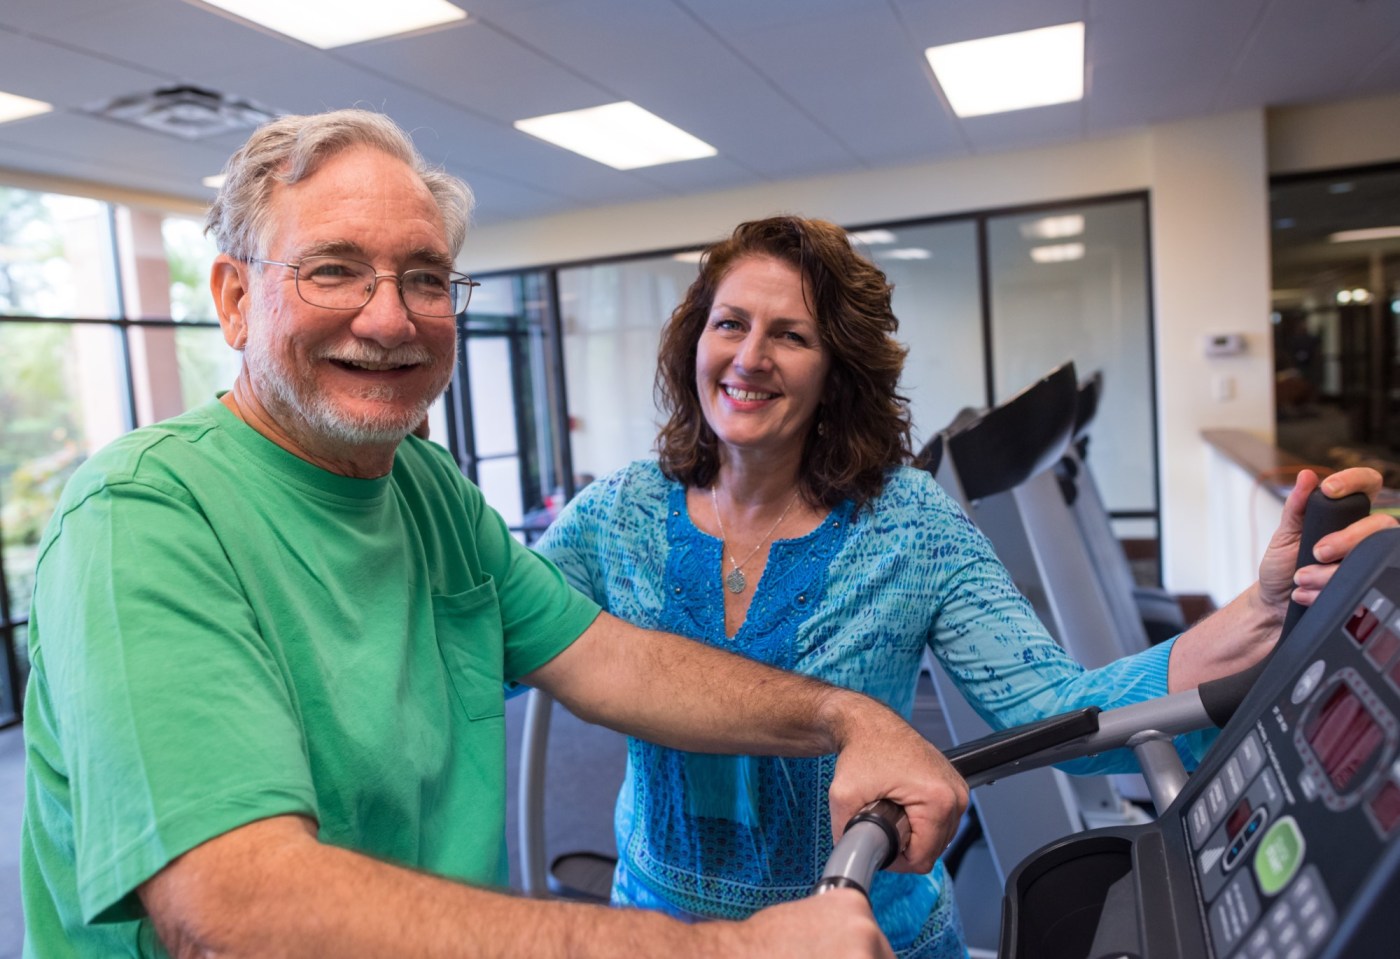 Cardiac rehab after a heart attack or bypass surgery has been shown to increase survival.